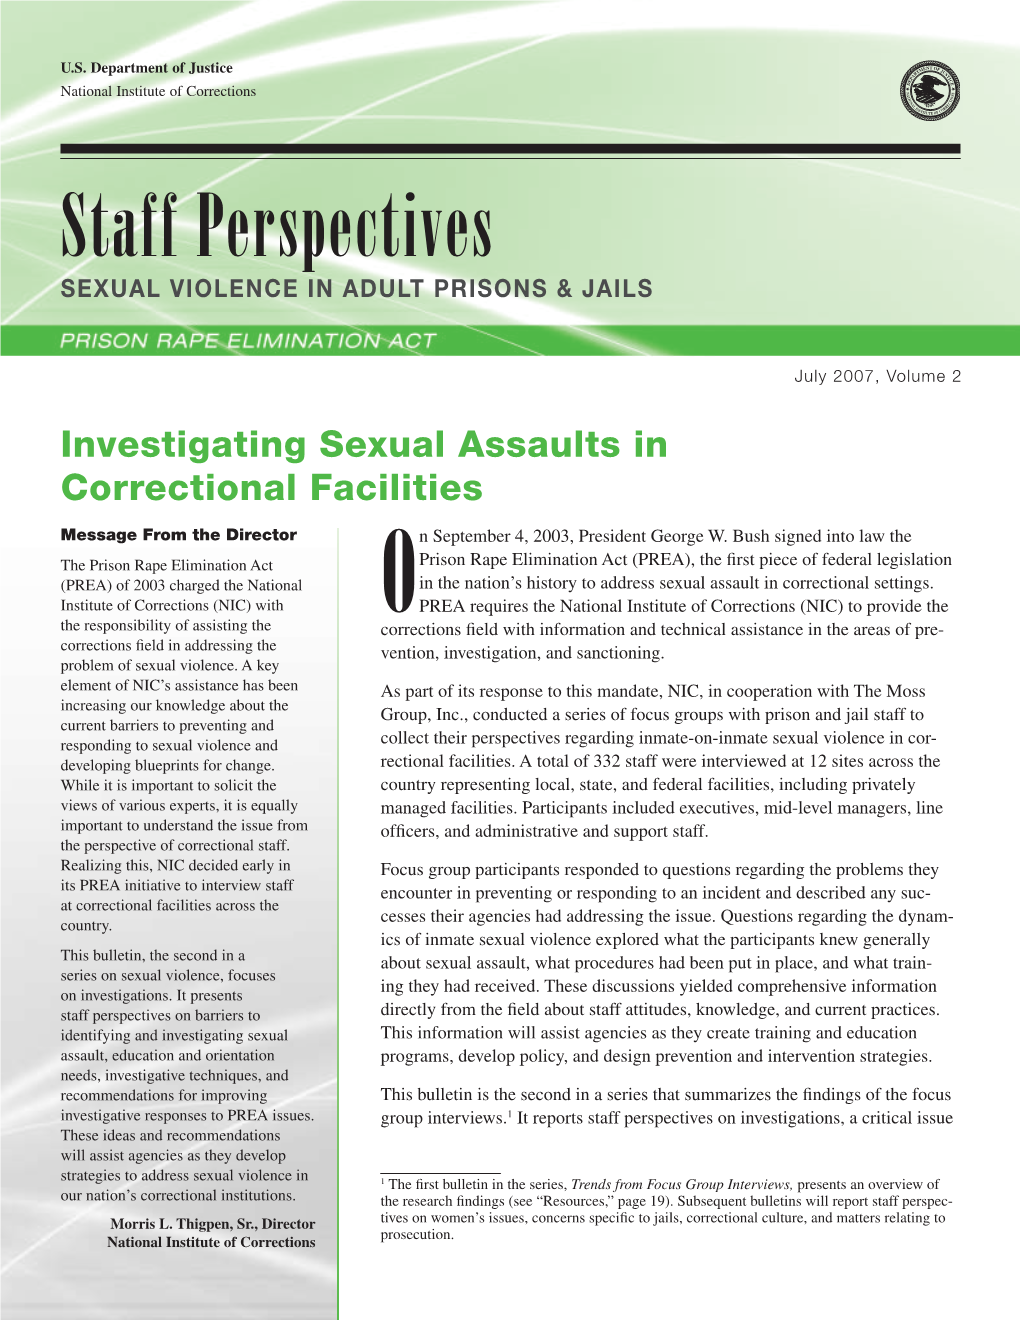 Staff Perspectives: Sexual Violence in Adult Prisons and Jails